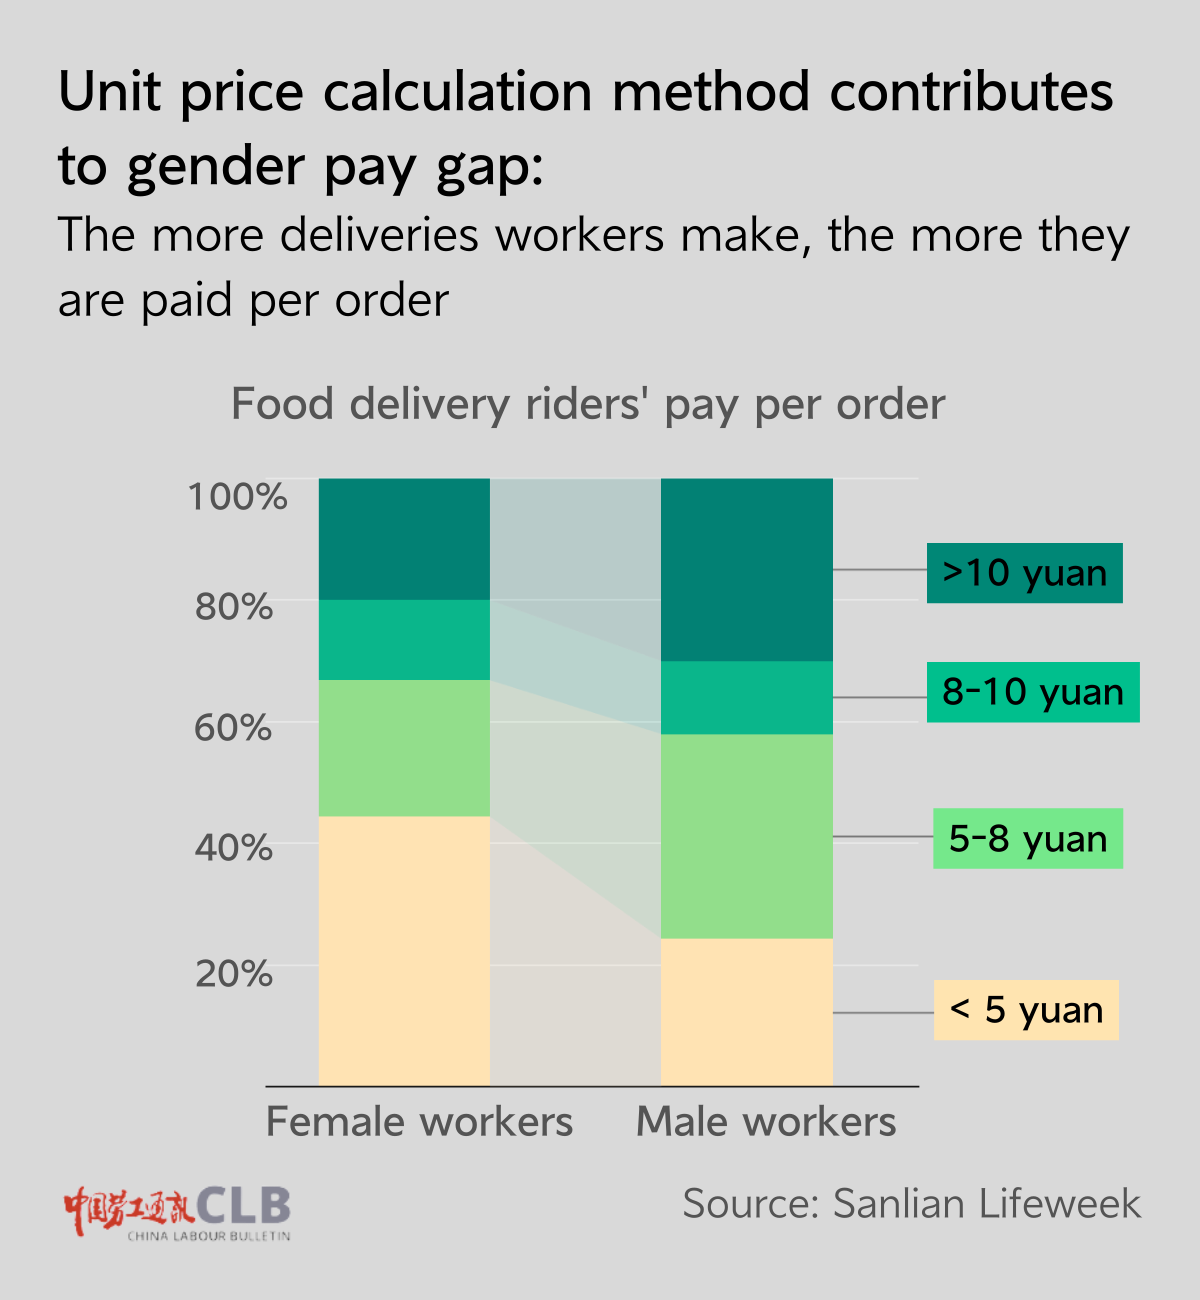 A CLB graphic shows that over 60 percent of women workers are paid less than 8 yuan per delivery, and men have a greater earning power